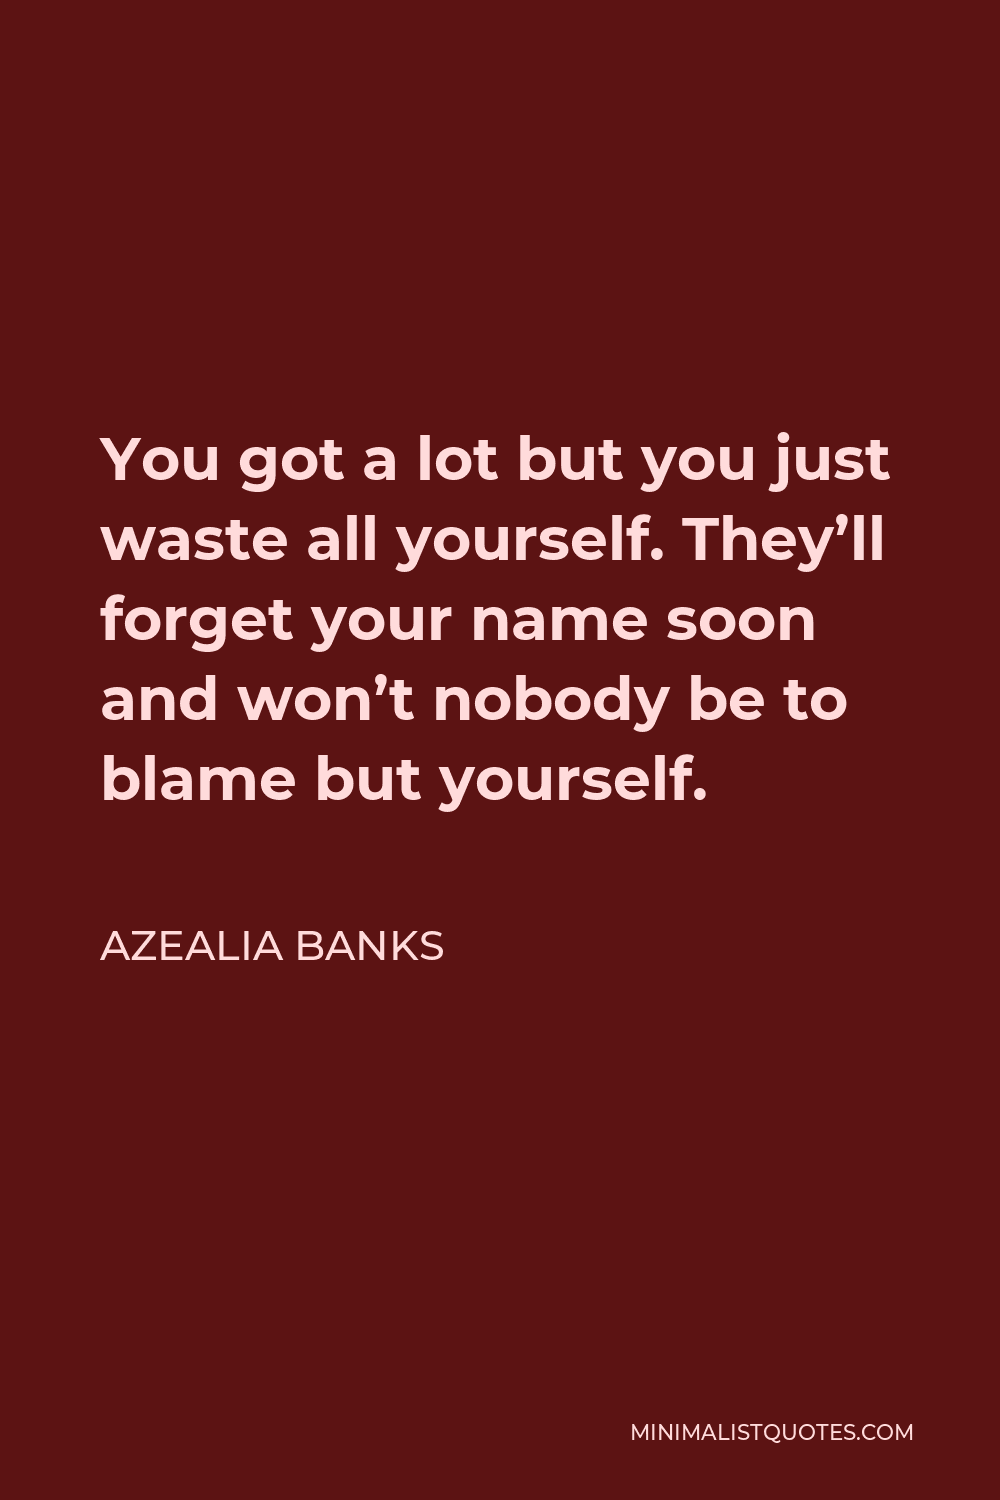 Azealia Banks Quote - You got a lot but you just waste all yourself. They’ll forget your name soon and won’t nobody be to blame but yourself.